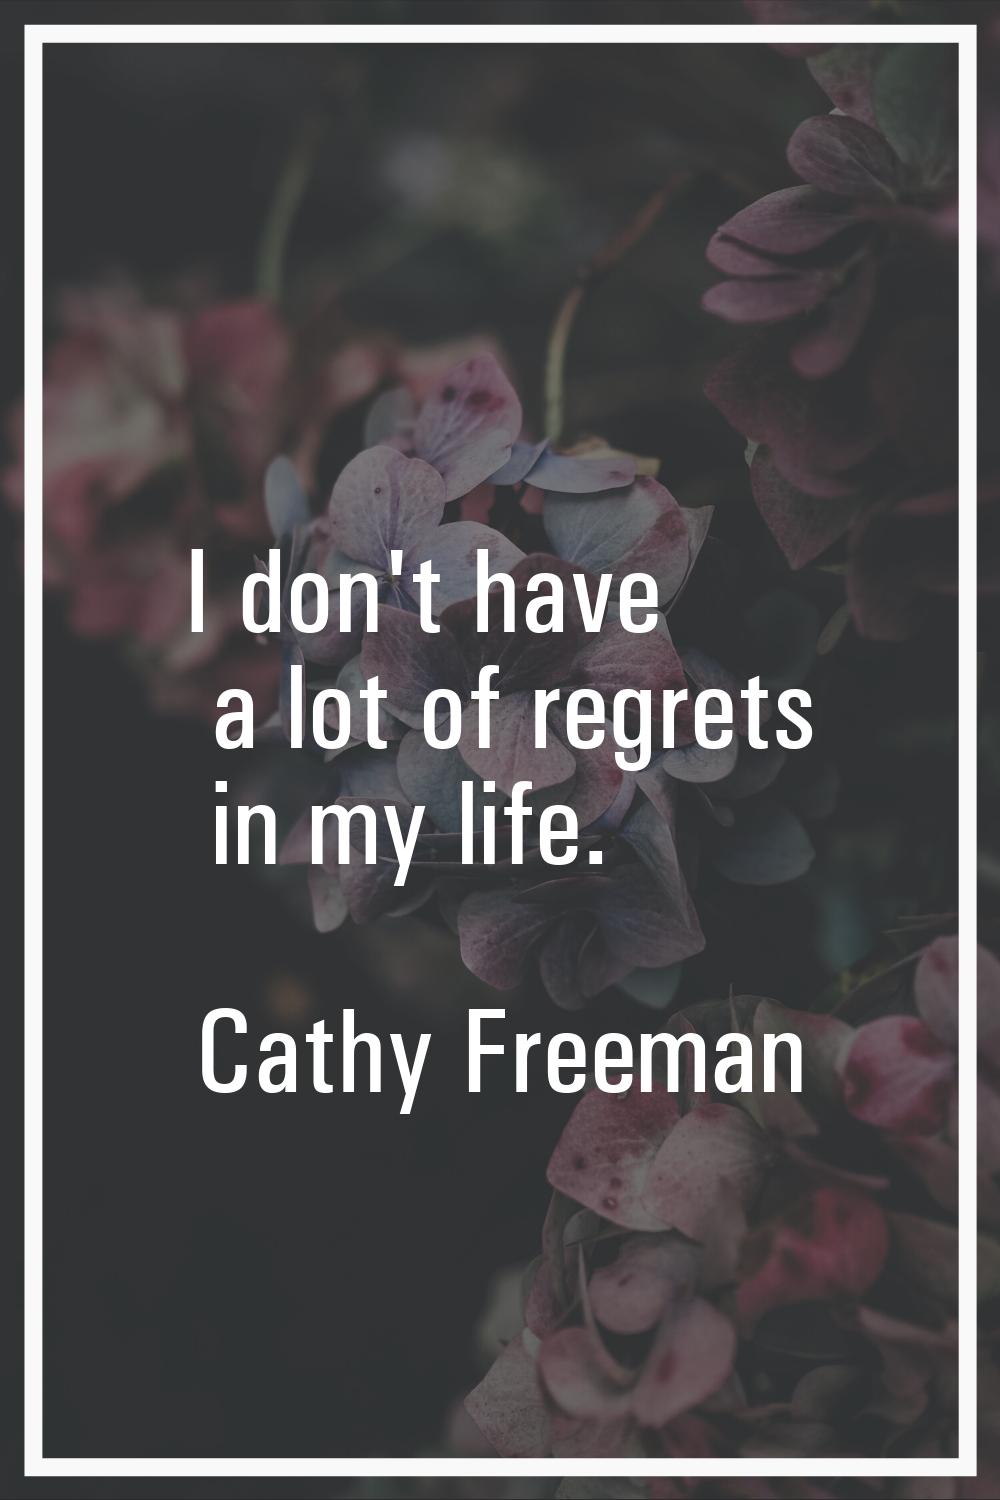 I don't have a lot of regrets in my life.